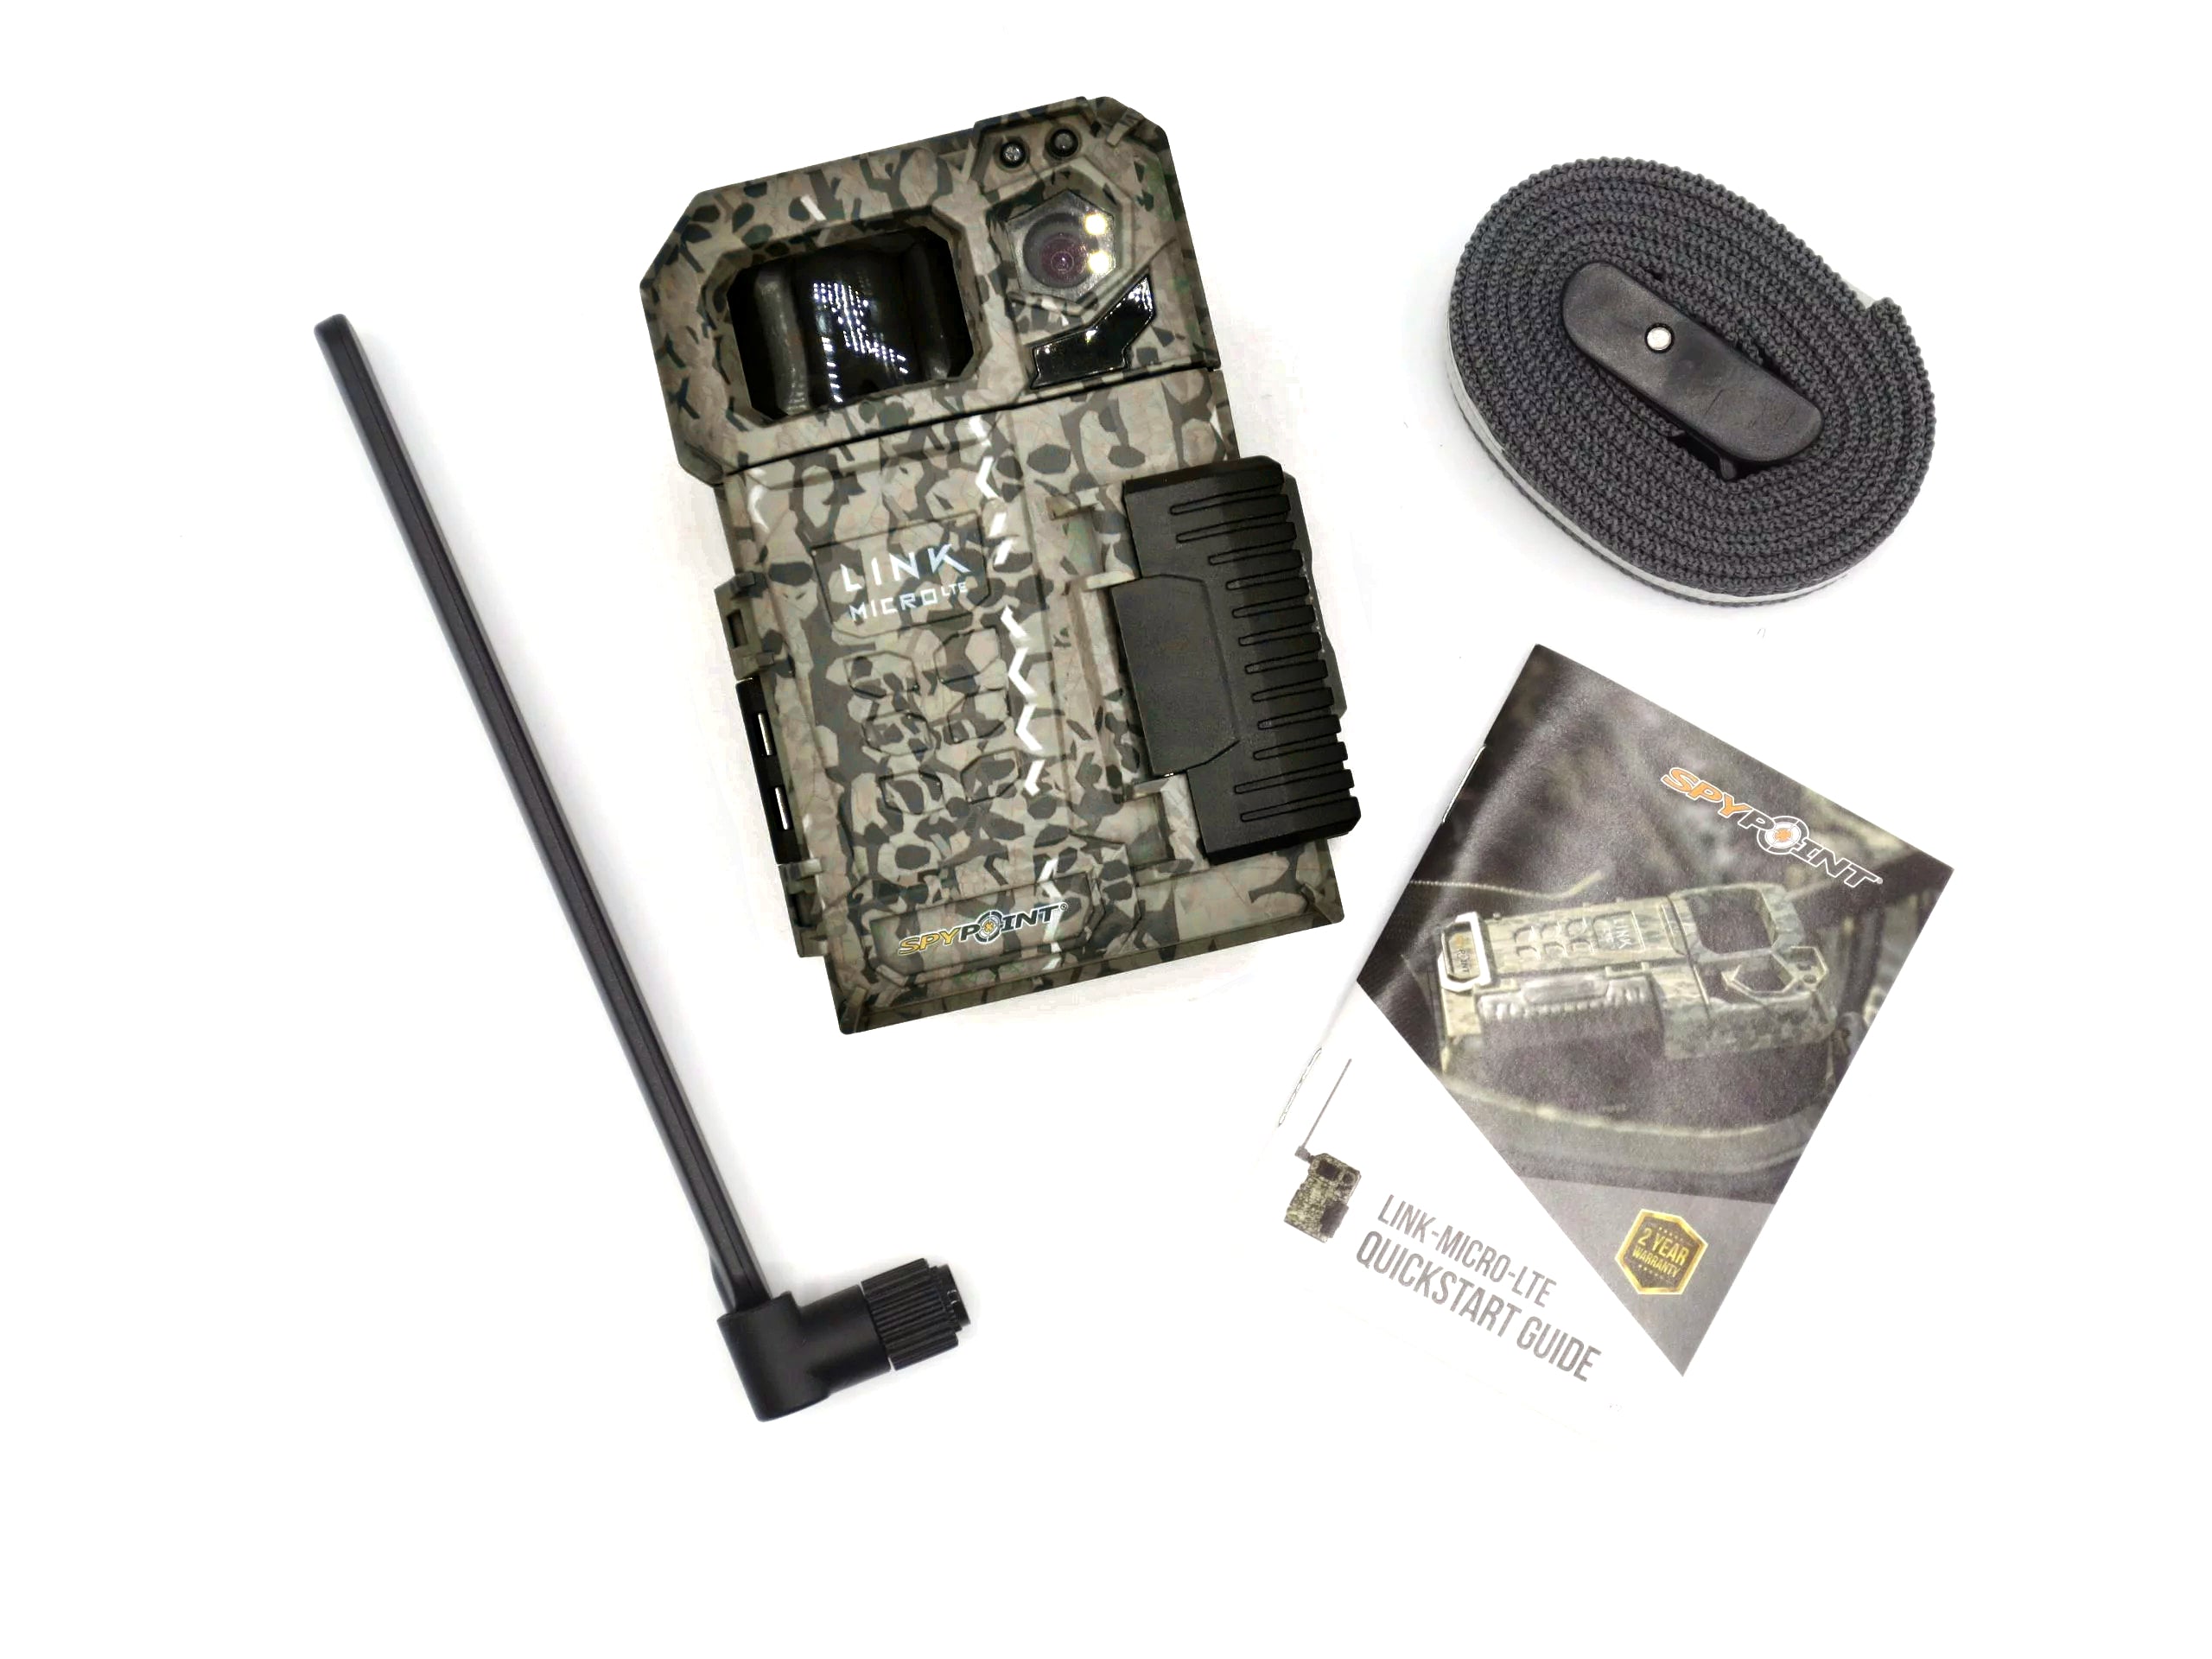 Spypoint LINK-MICRO-LTE cellular Trail wildlife camera